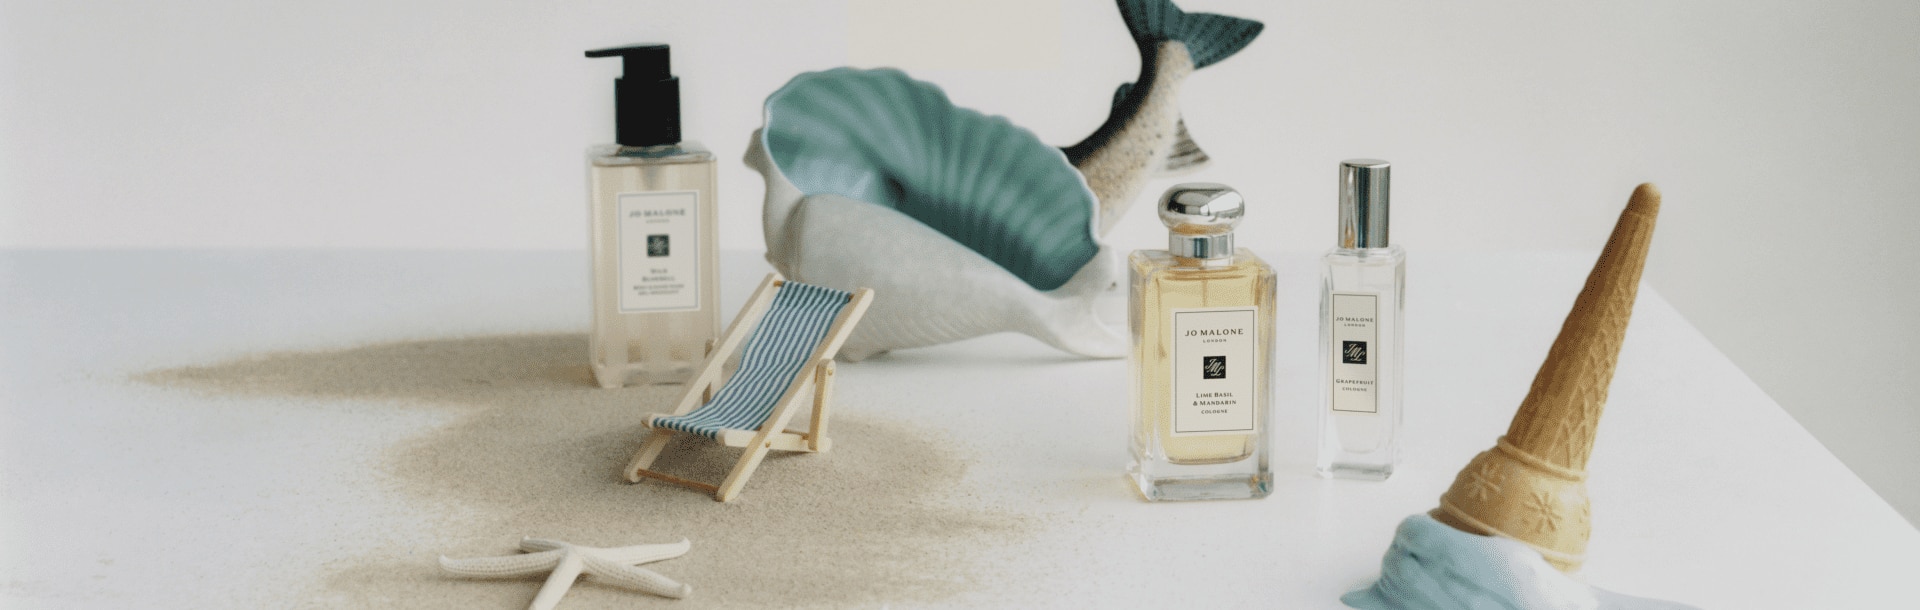 image of jo malone london wild bluebell body & hand wash next to two colognes with a mini deckchair & sandy background